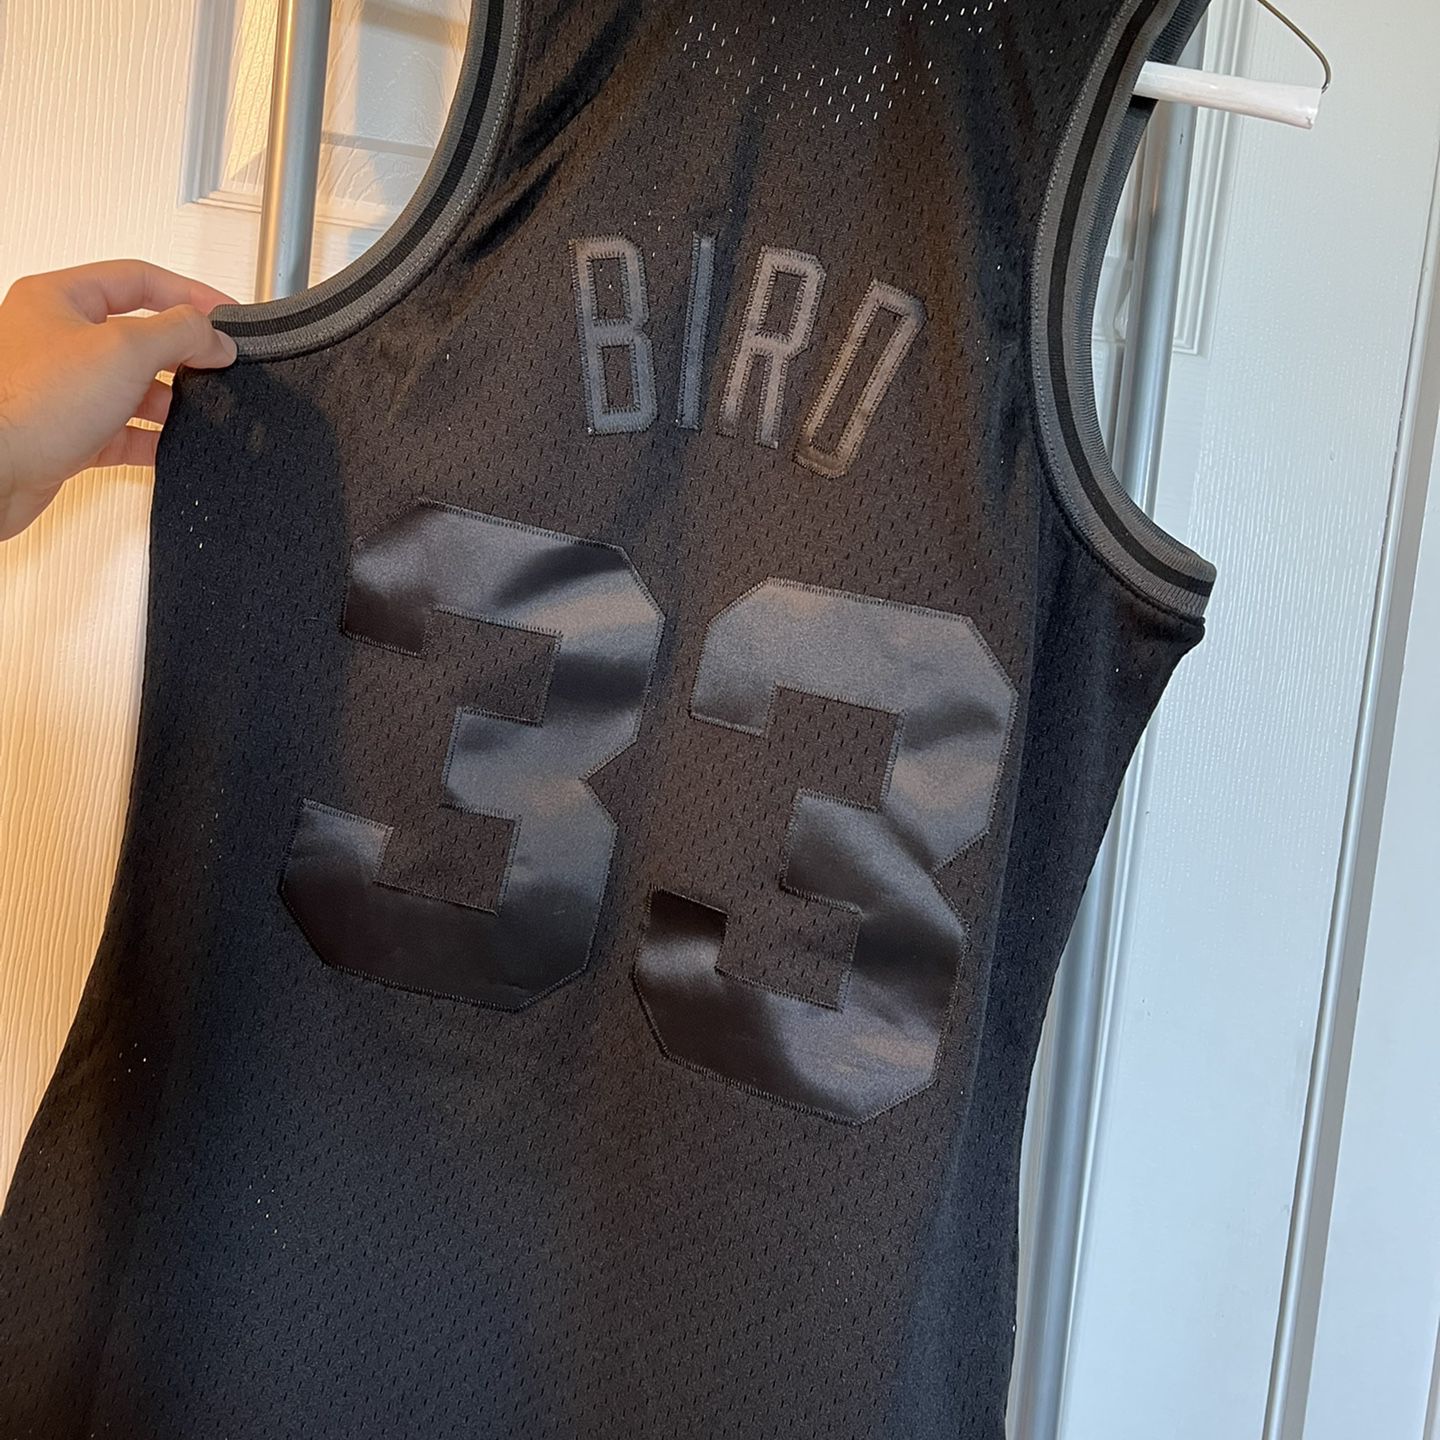 Youth medium Larry Bird Jersey for Sale in Westbury, NY - OfferUp